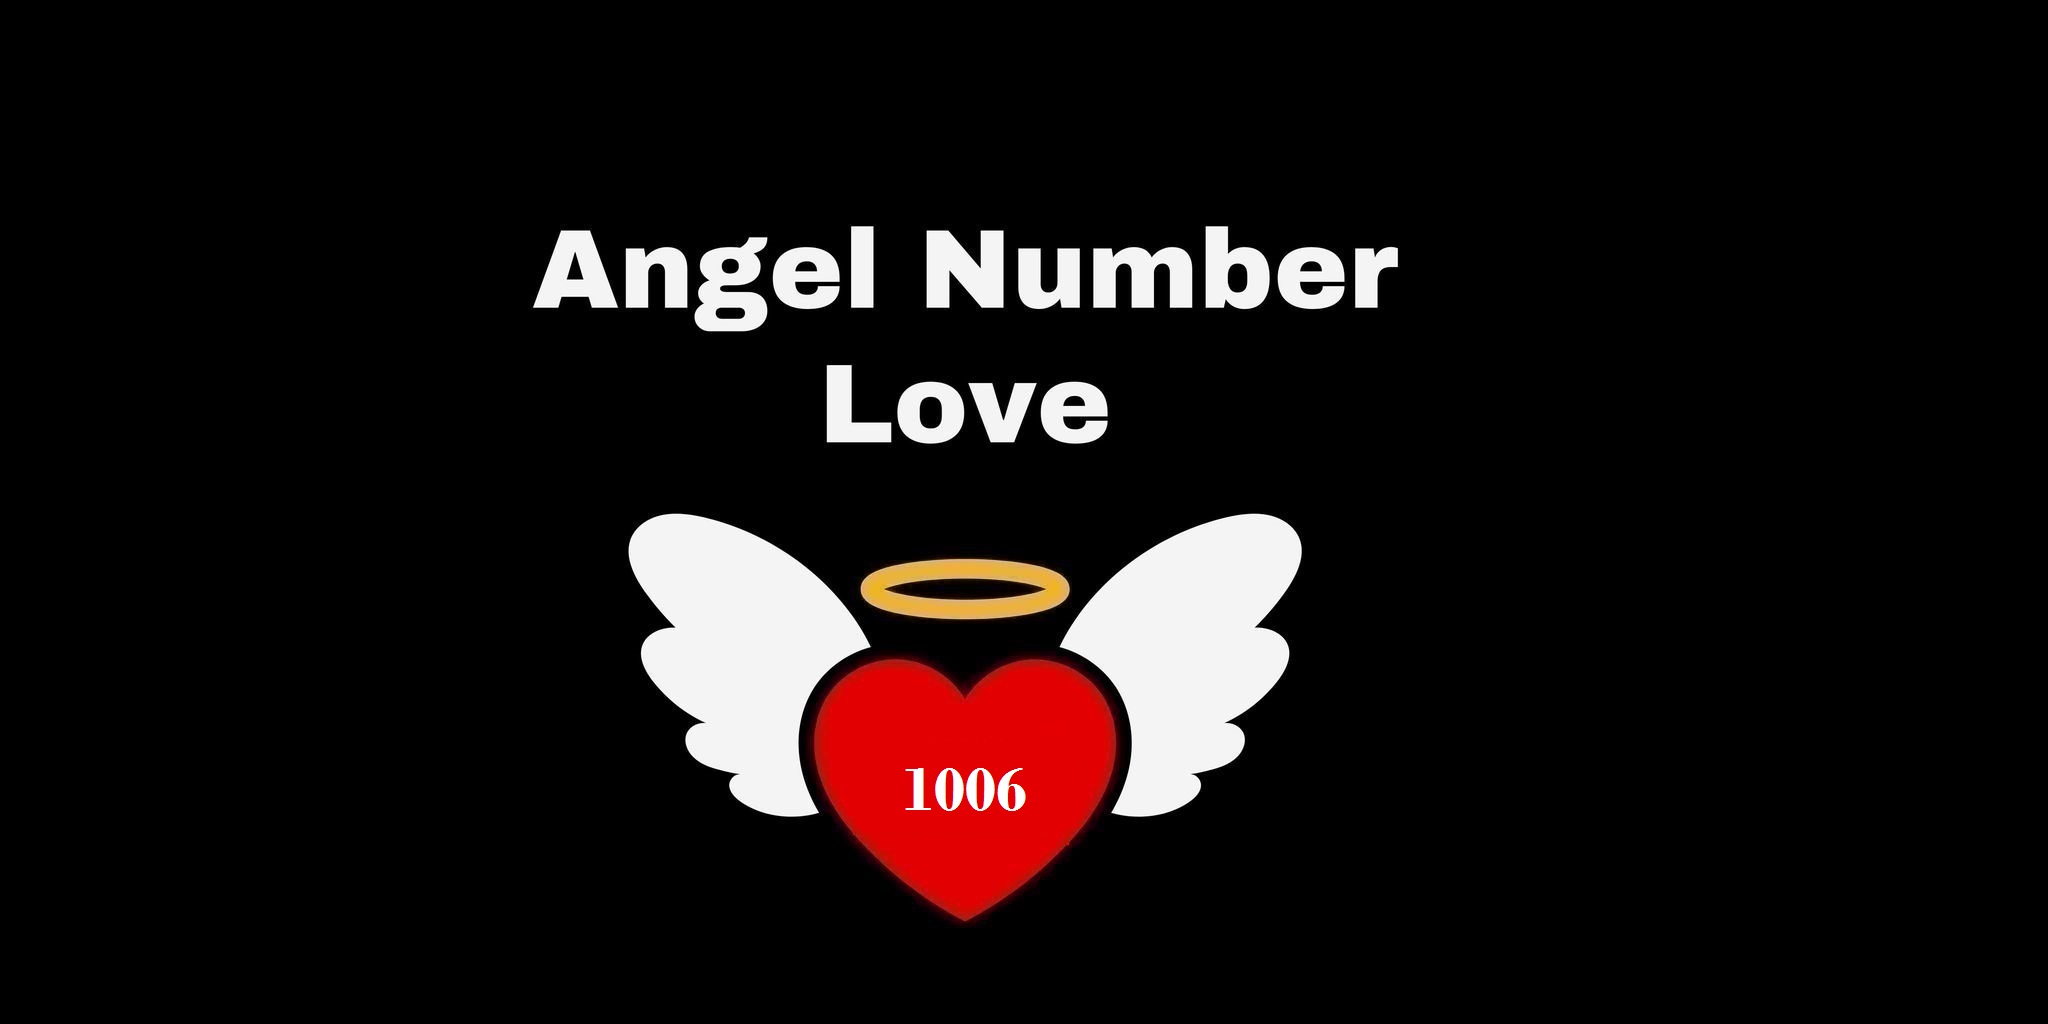 1006 Angel Number Meaning In Love